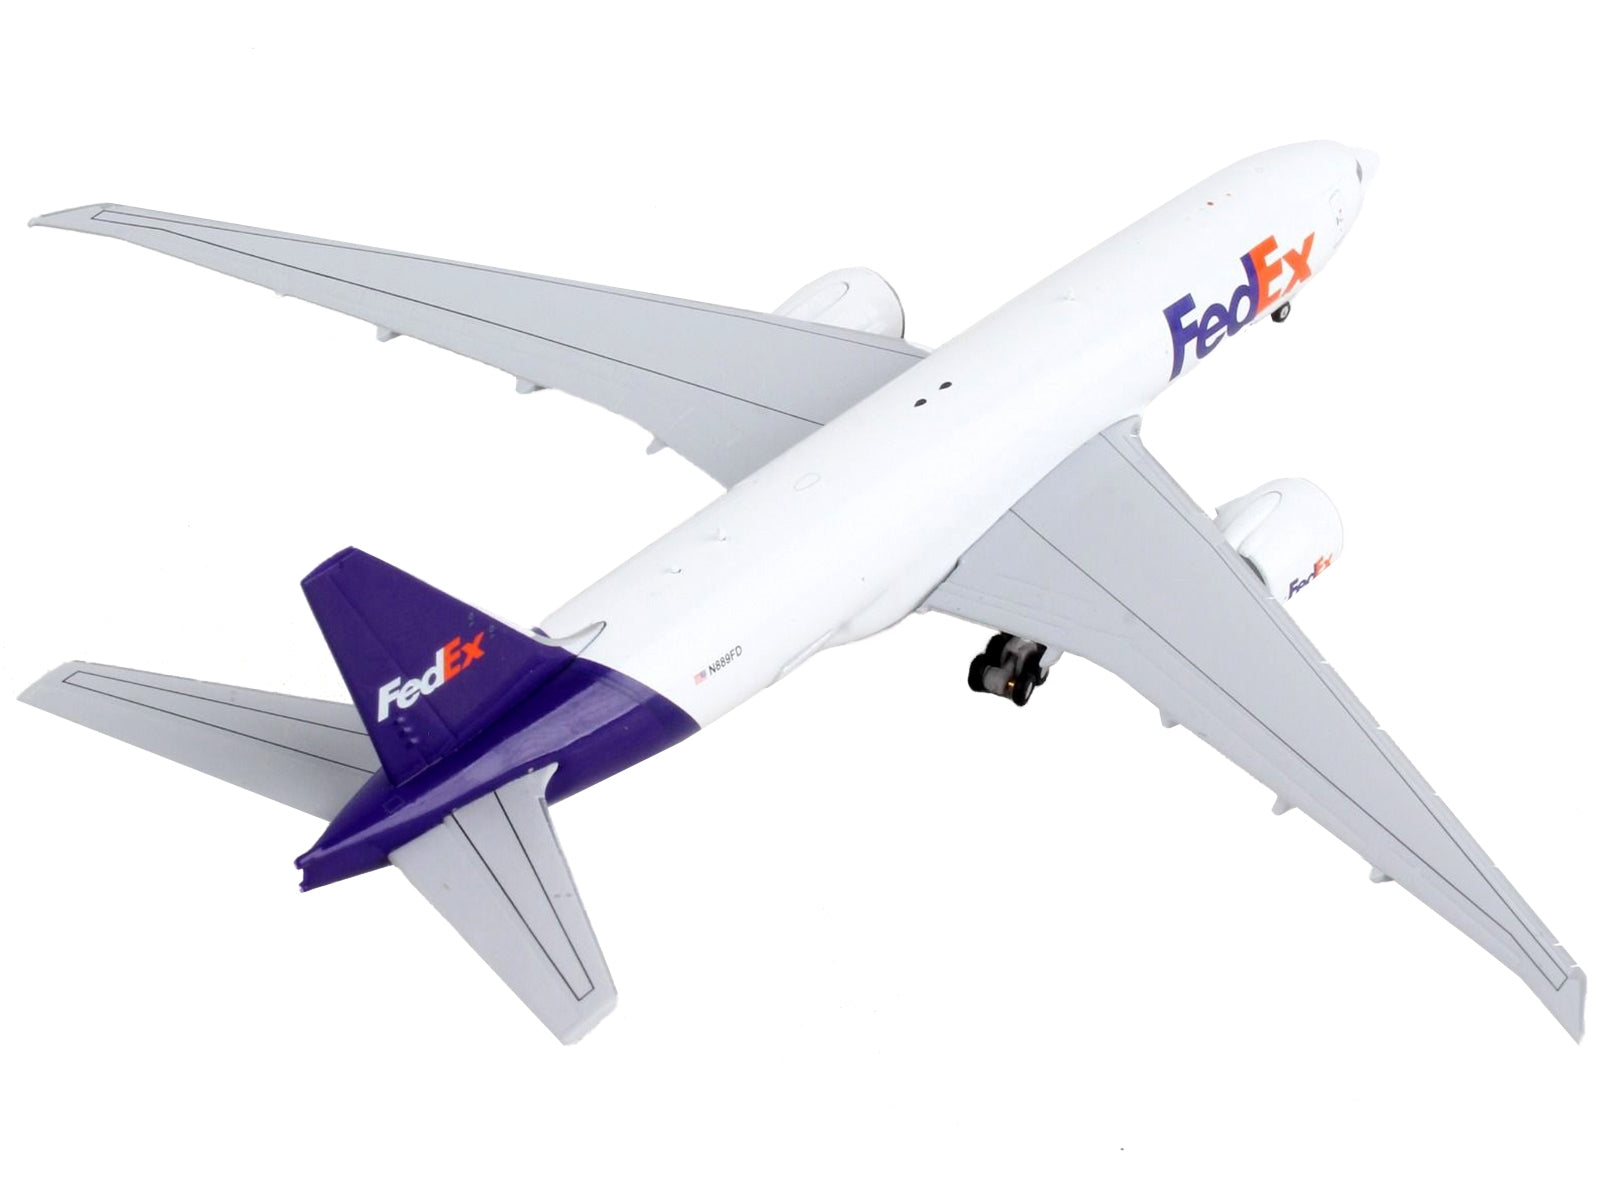 Boeing 777F Commercial Aircraft "Federal Express (Fedex)" White with Purple Tail "Interactive Series" 1/400 Diecast Model Airplane by GeminiJets